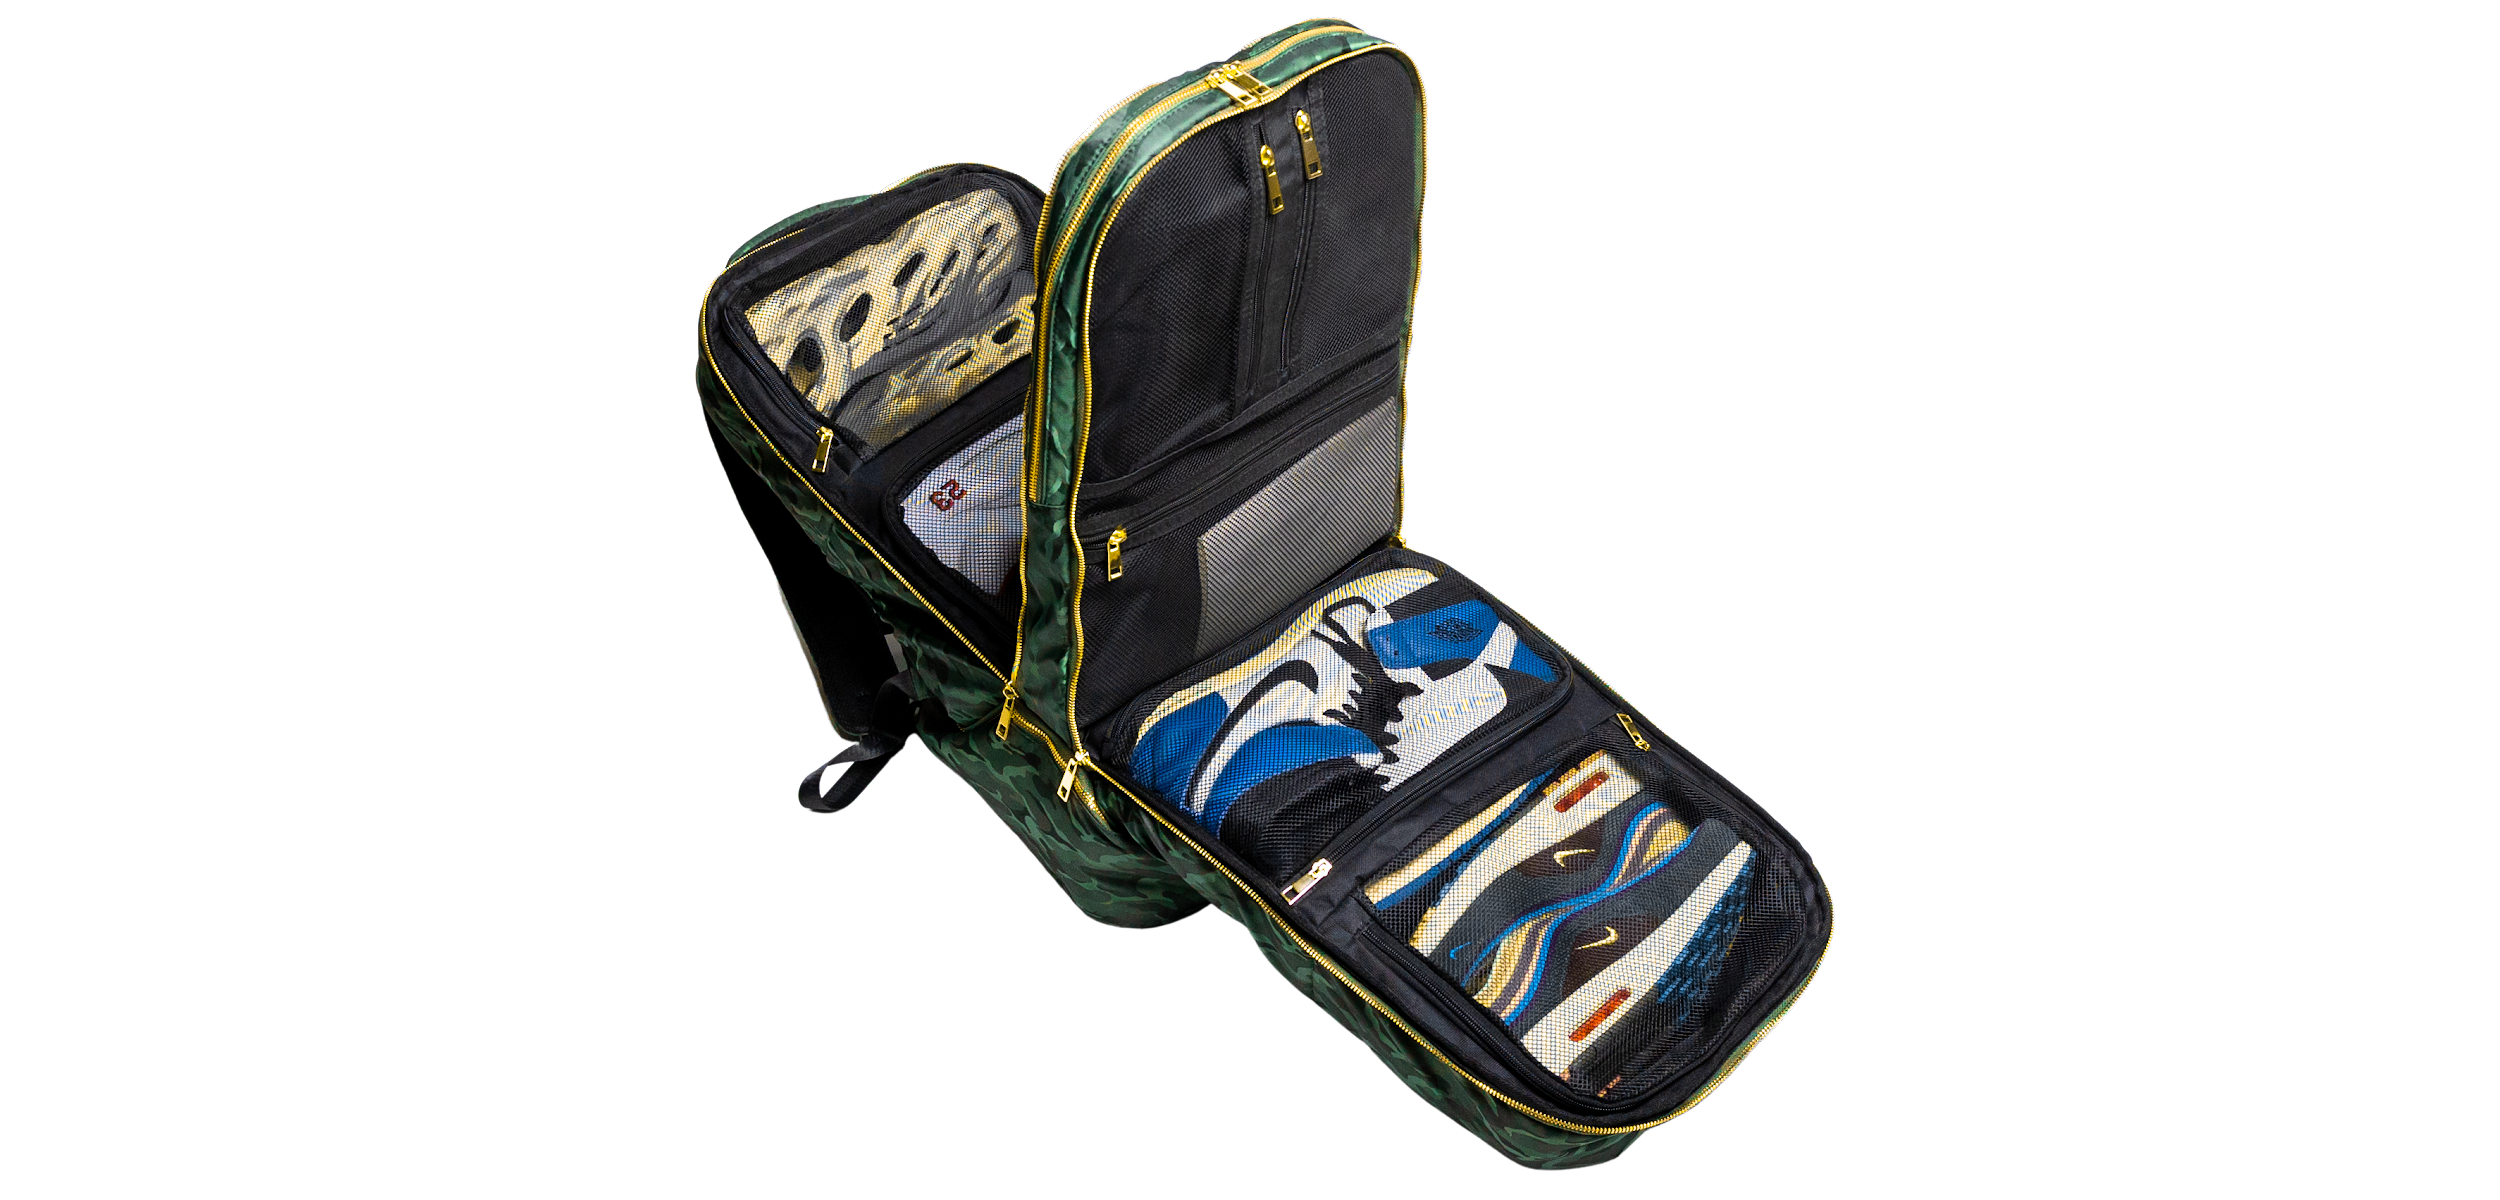 Sneaker Travel Bag - Carry On Backpack for Shoes and Clothes